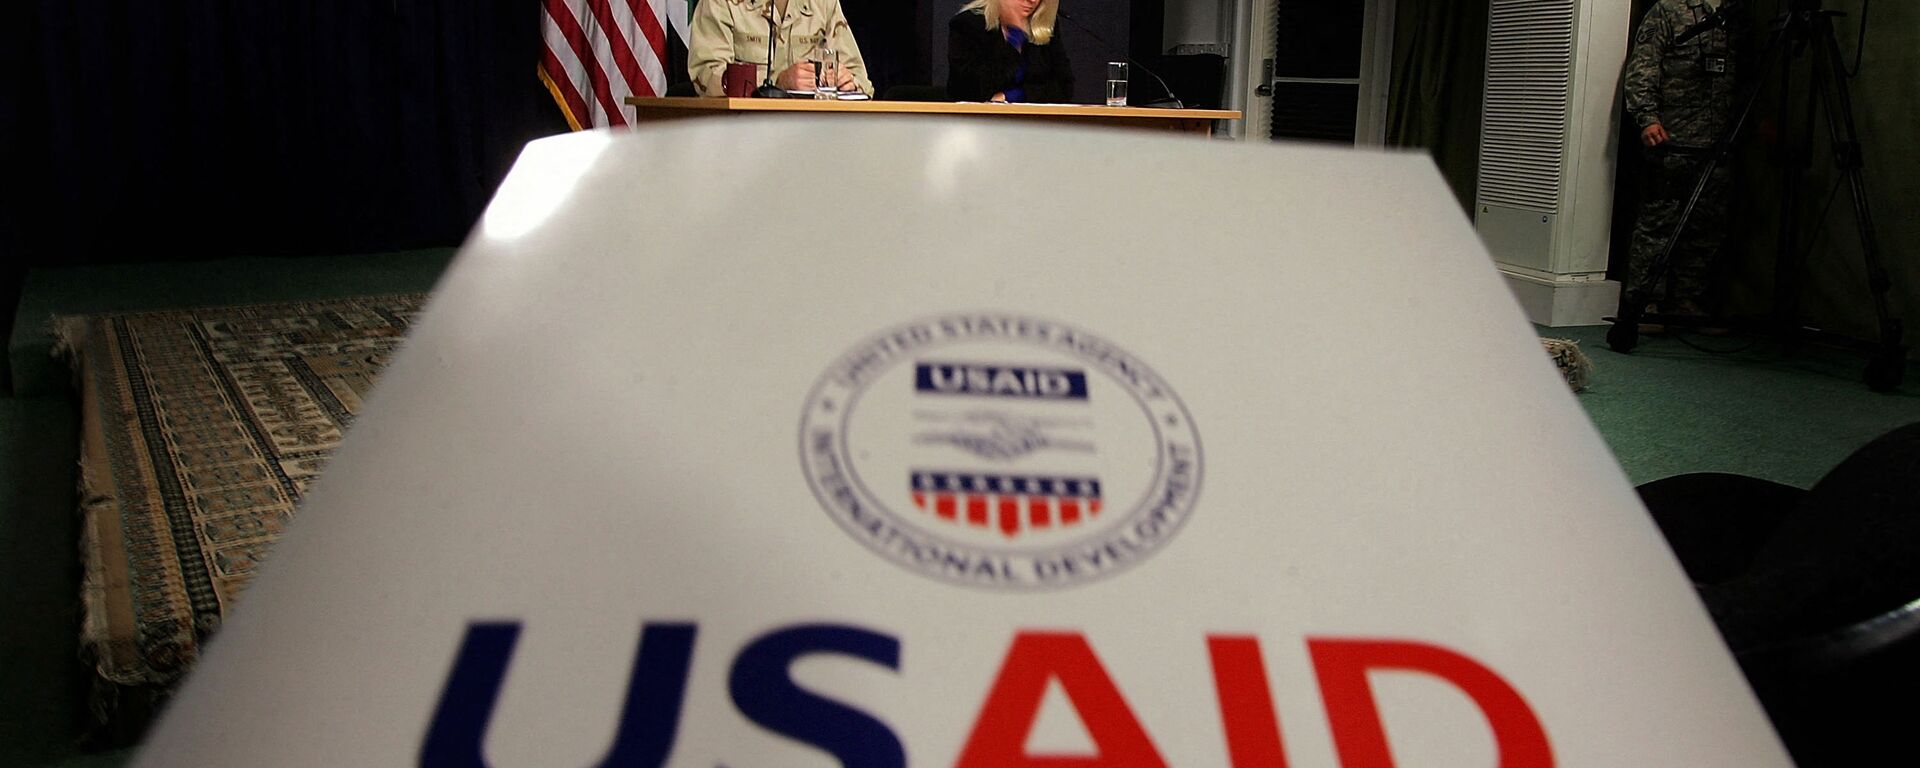 Denise Herbol (C-R), deputy director of the United States Agency for International Development – Iraq (USAID), and Rear Adm. Gregory Smith (L), director of the Multi-National Force-Iraq's Communications Division hold a joint press conference at the heavily fortified Green Zone area in Baghdad, 13 January 2008 - Sputnik International, 1920, 04.08.2022